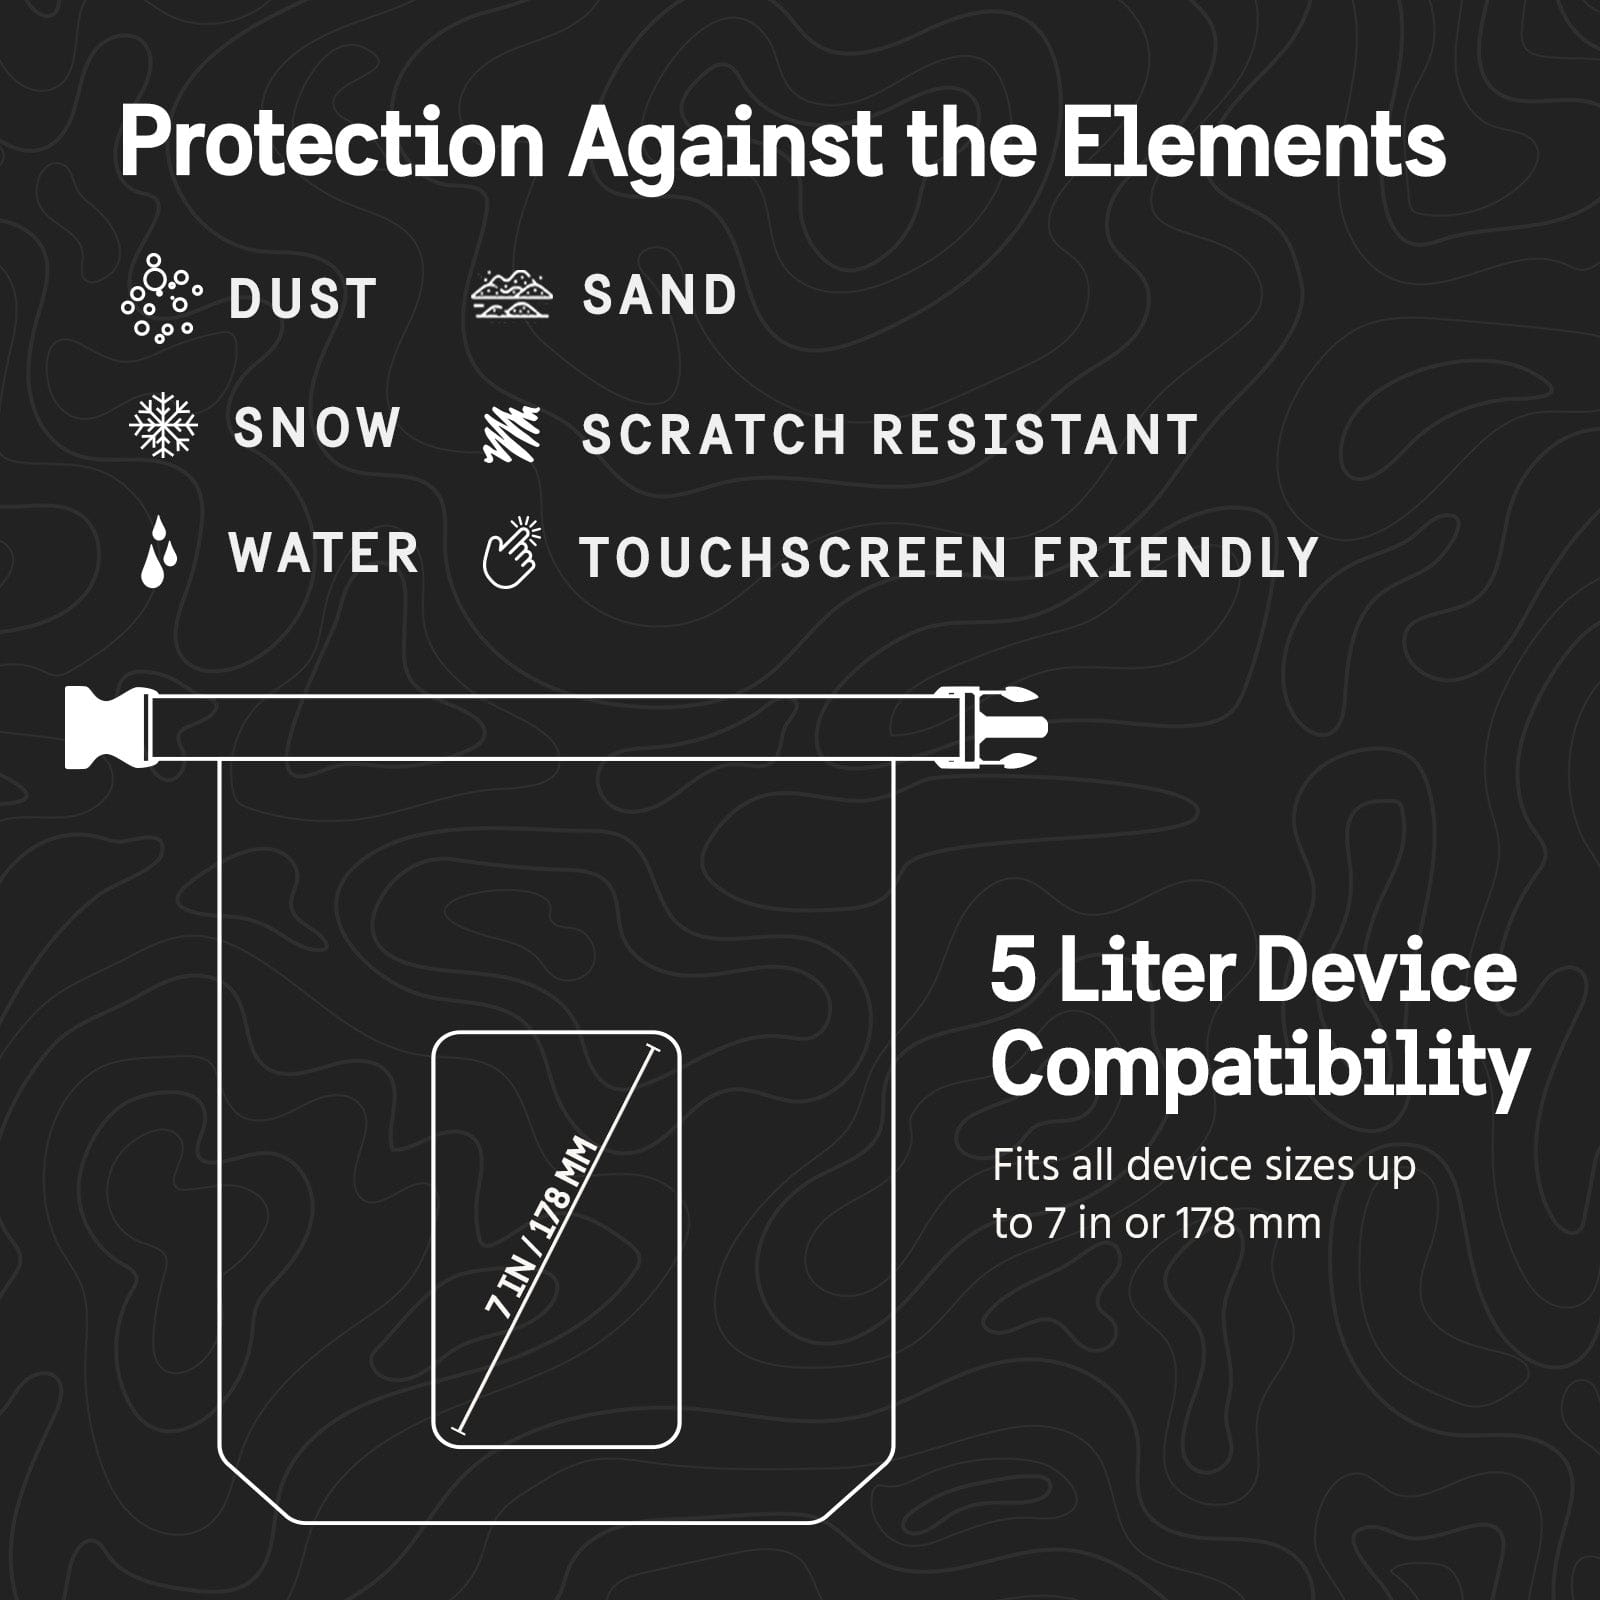 PROTECTION AGAINST THE ELEMENTS. DUST, SAND, SNOW, SCRATCH RESISTANT, WATER, TOUCH SCREEN FRIENDLY. FITS DEVICES UP TO 7" OR 178 MM.